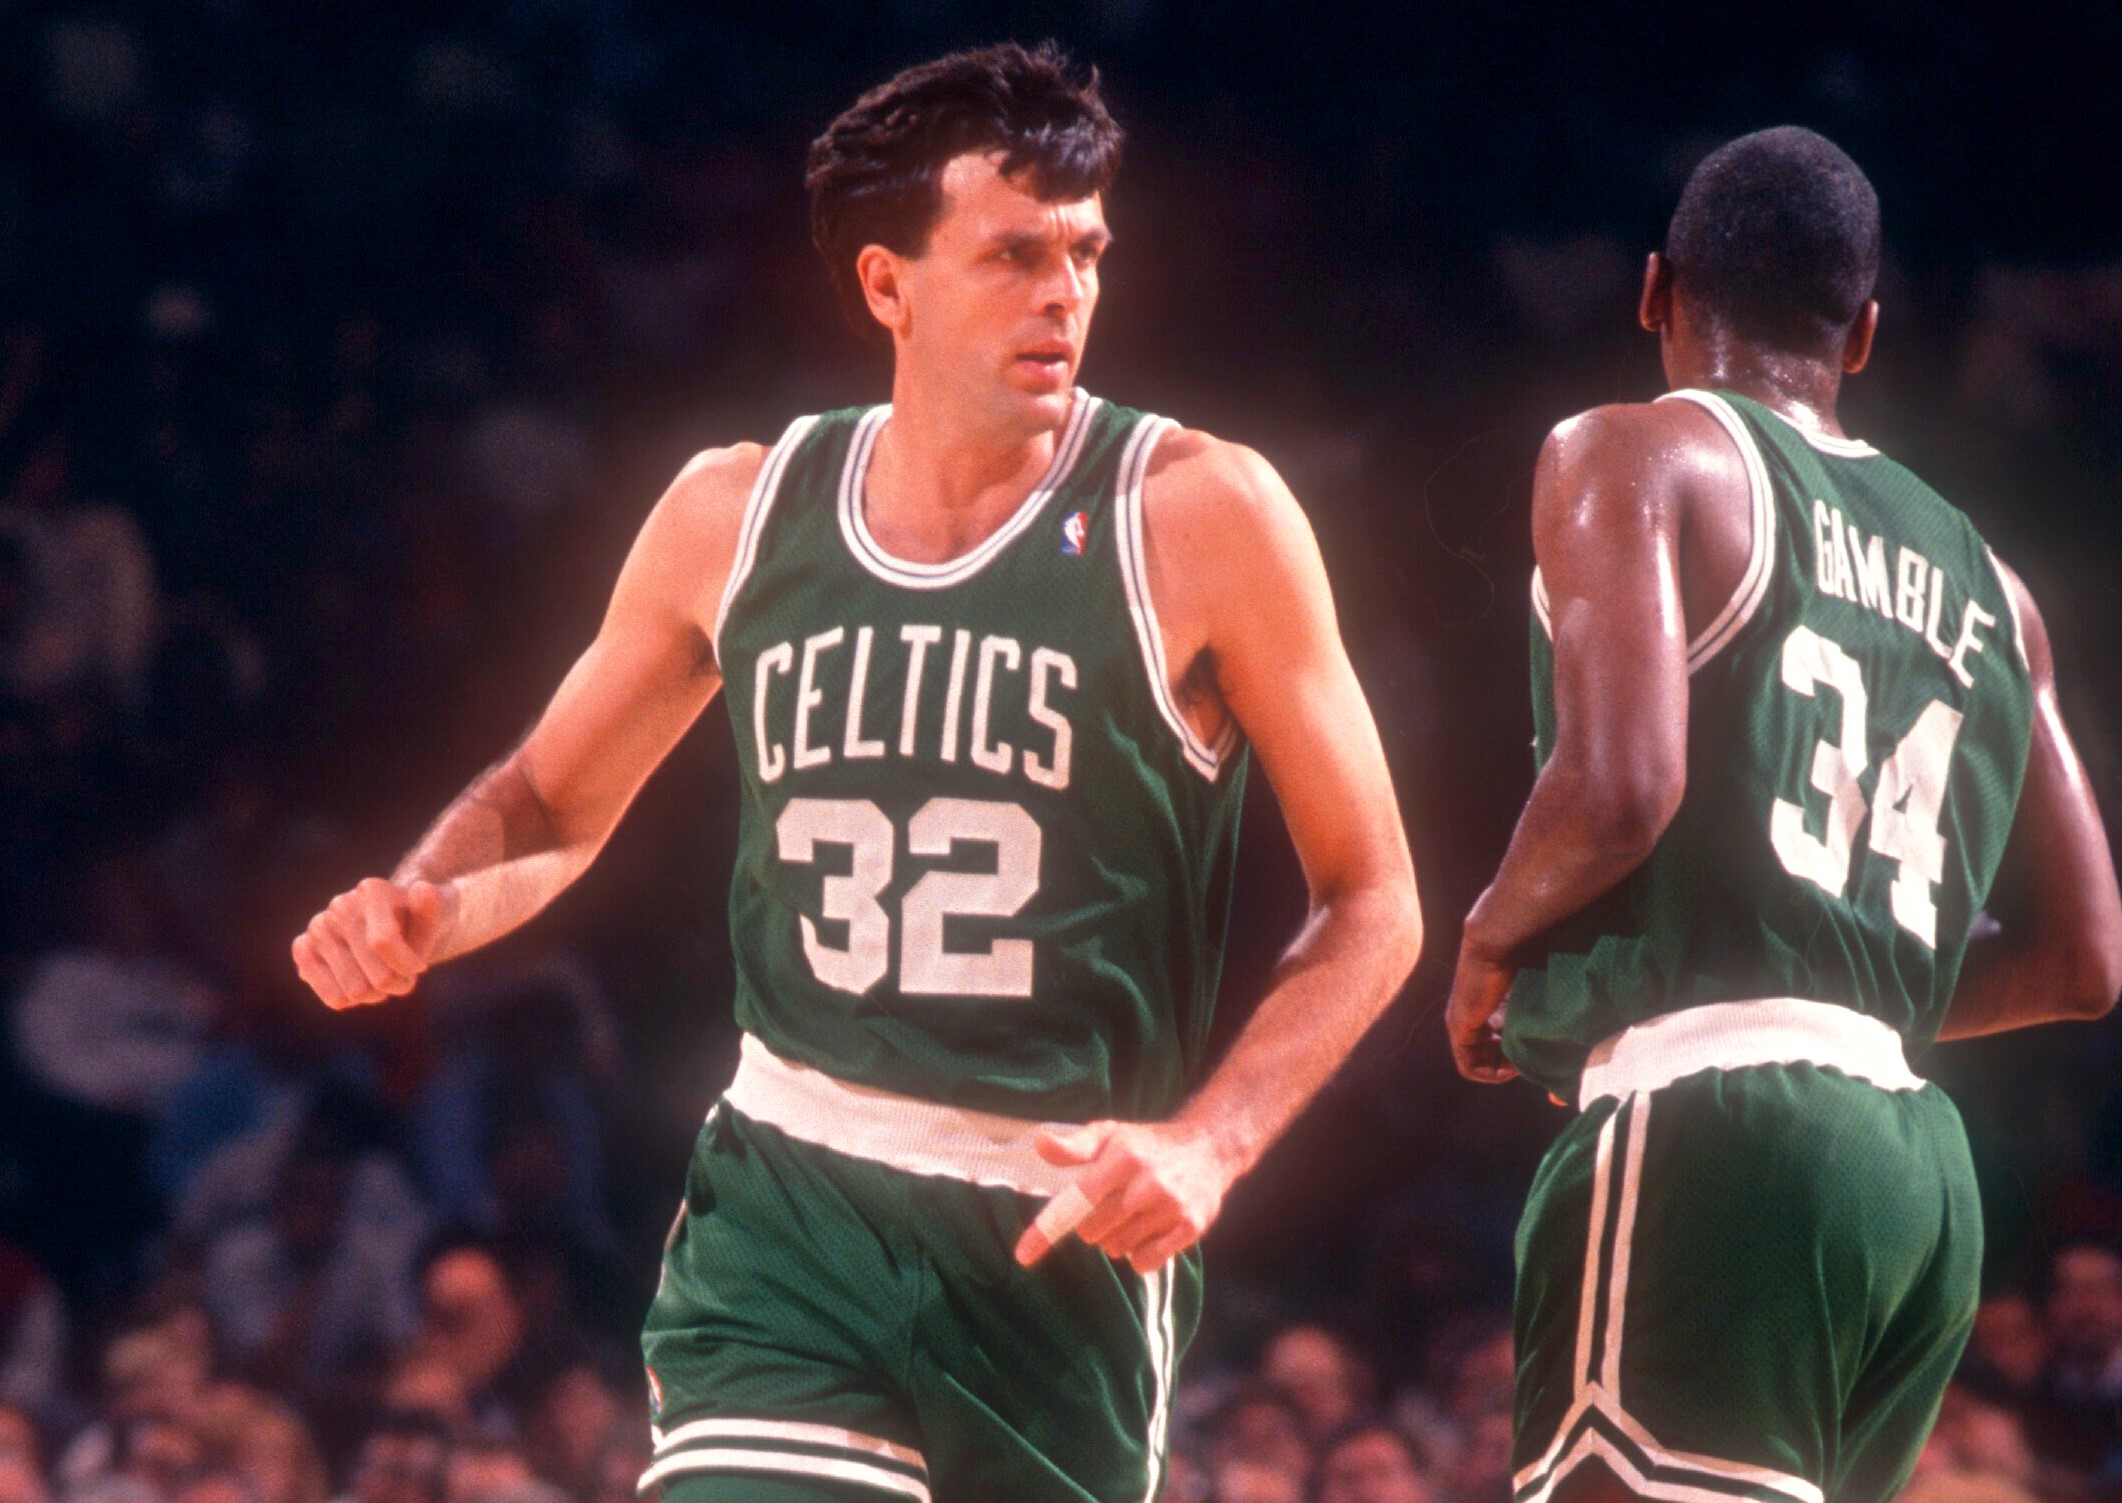 Kevin McHale of the Boston Celtics runs up the court.